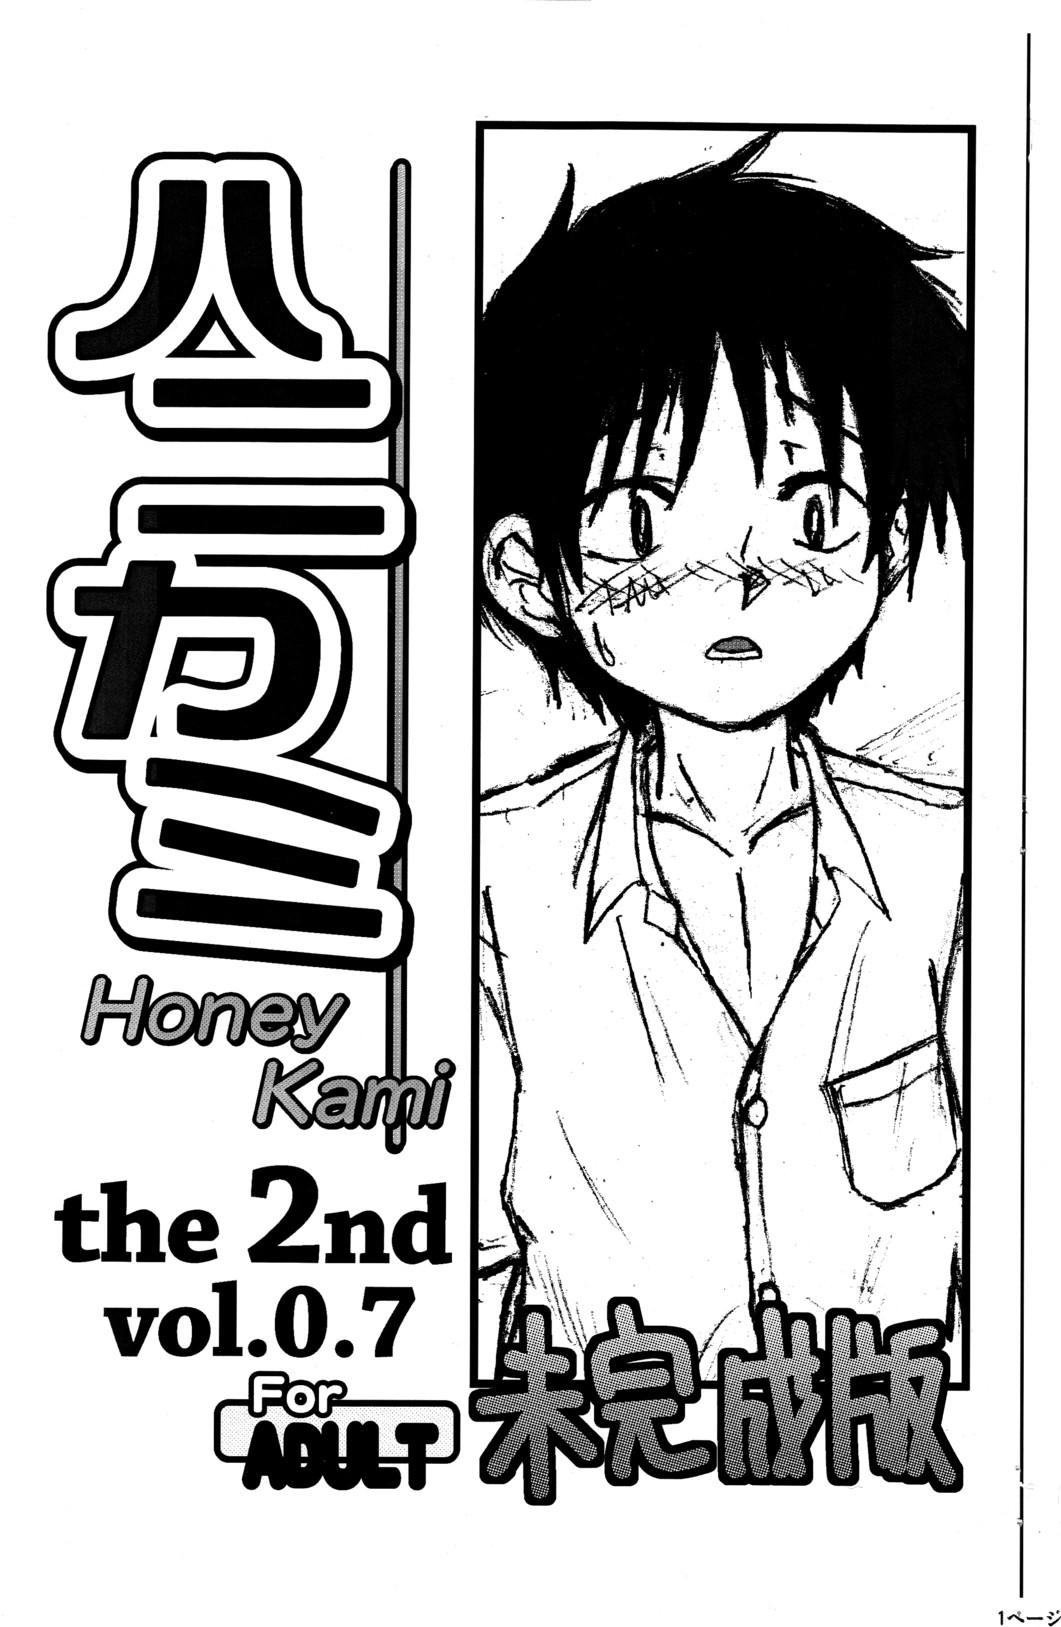 Vadia Crow (Theory of Heaven) - Honey Kami the 2nd vol.0.7 Fishnet - Page 1